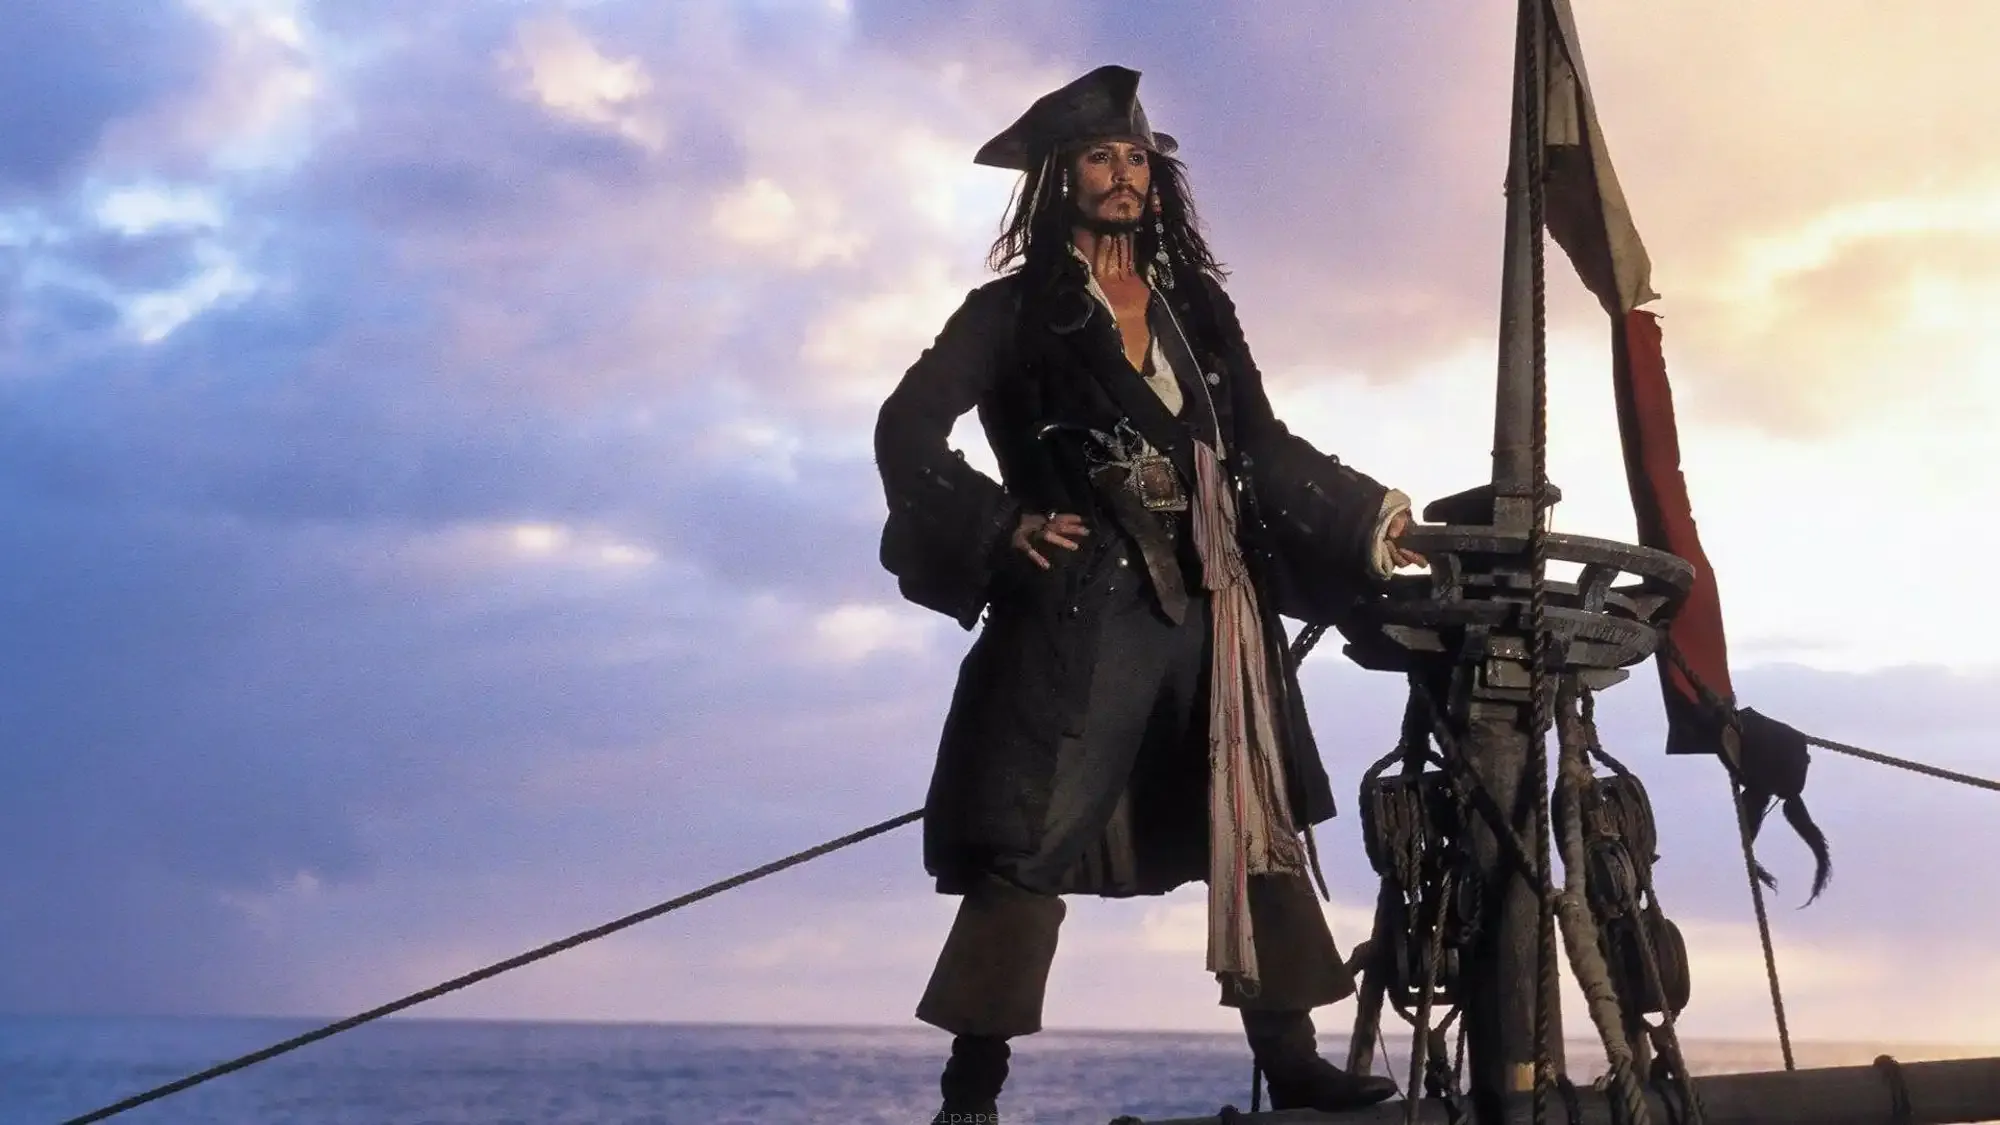 Pirates of the Caribbean: The Curse of the Black Pearl movie review